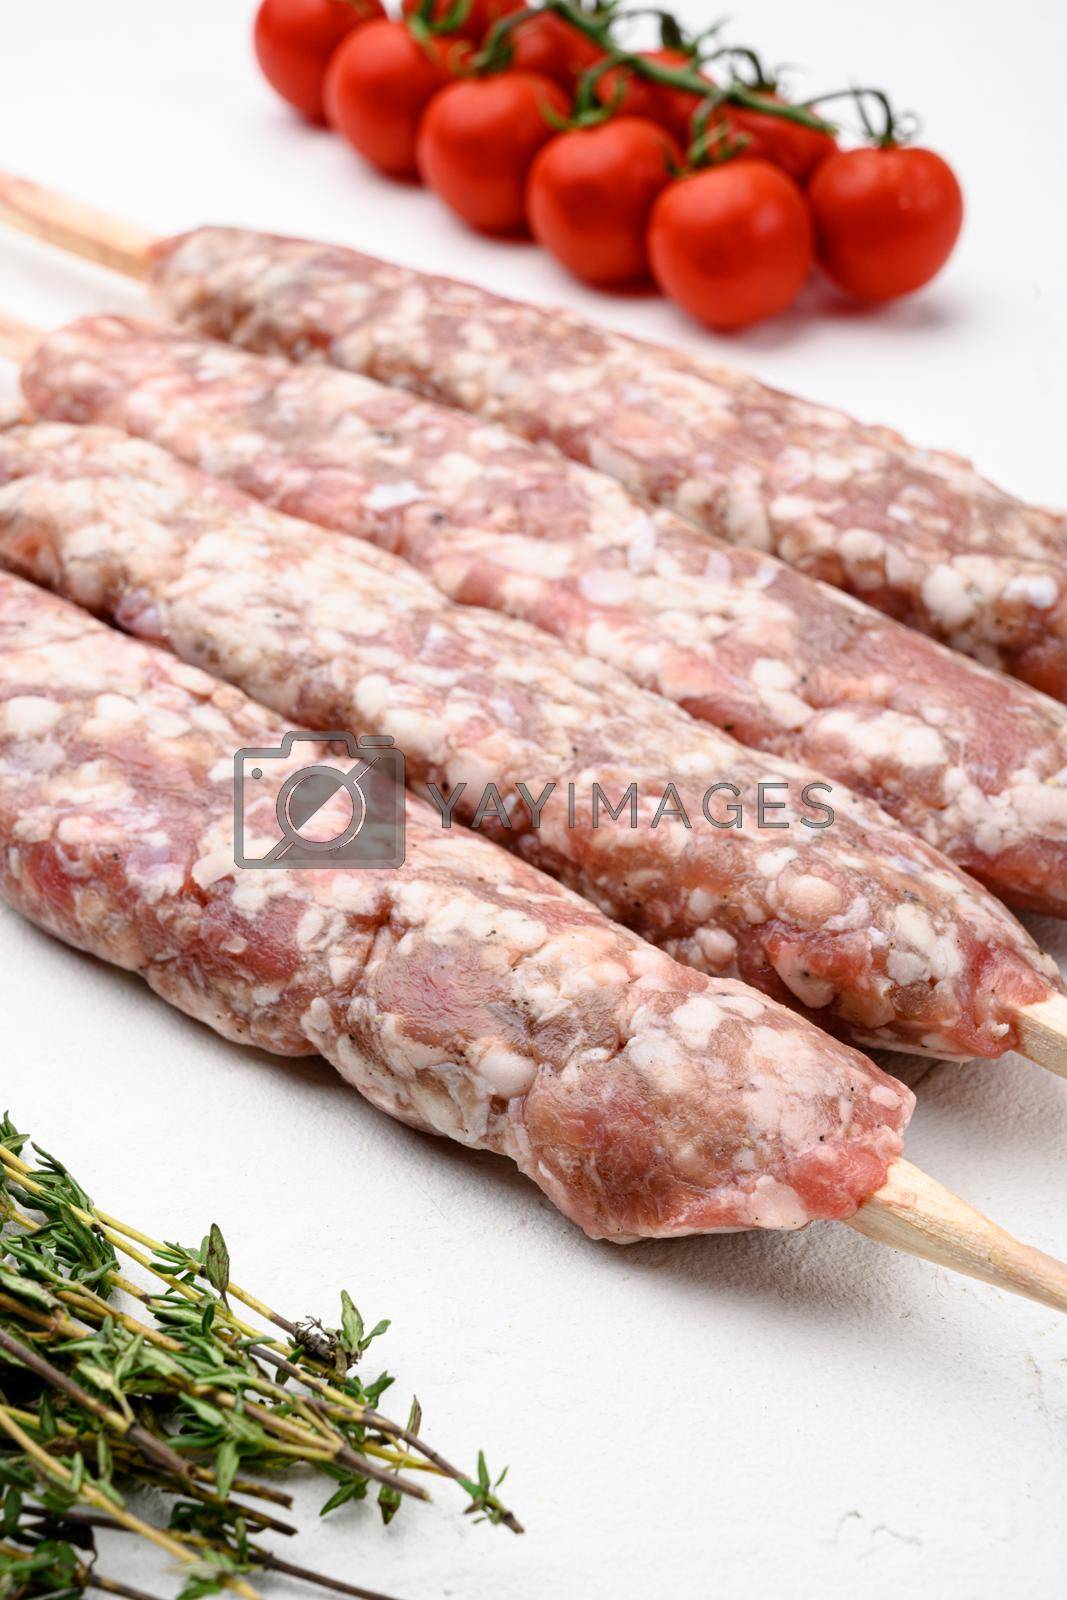 Royalty free image of Minced and shaped lamb mutton kebabs, with grill ingredients, on white stone table background by Ilianesolenyi